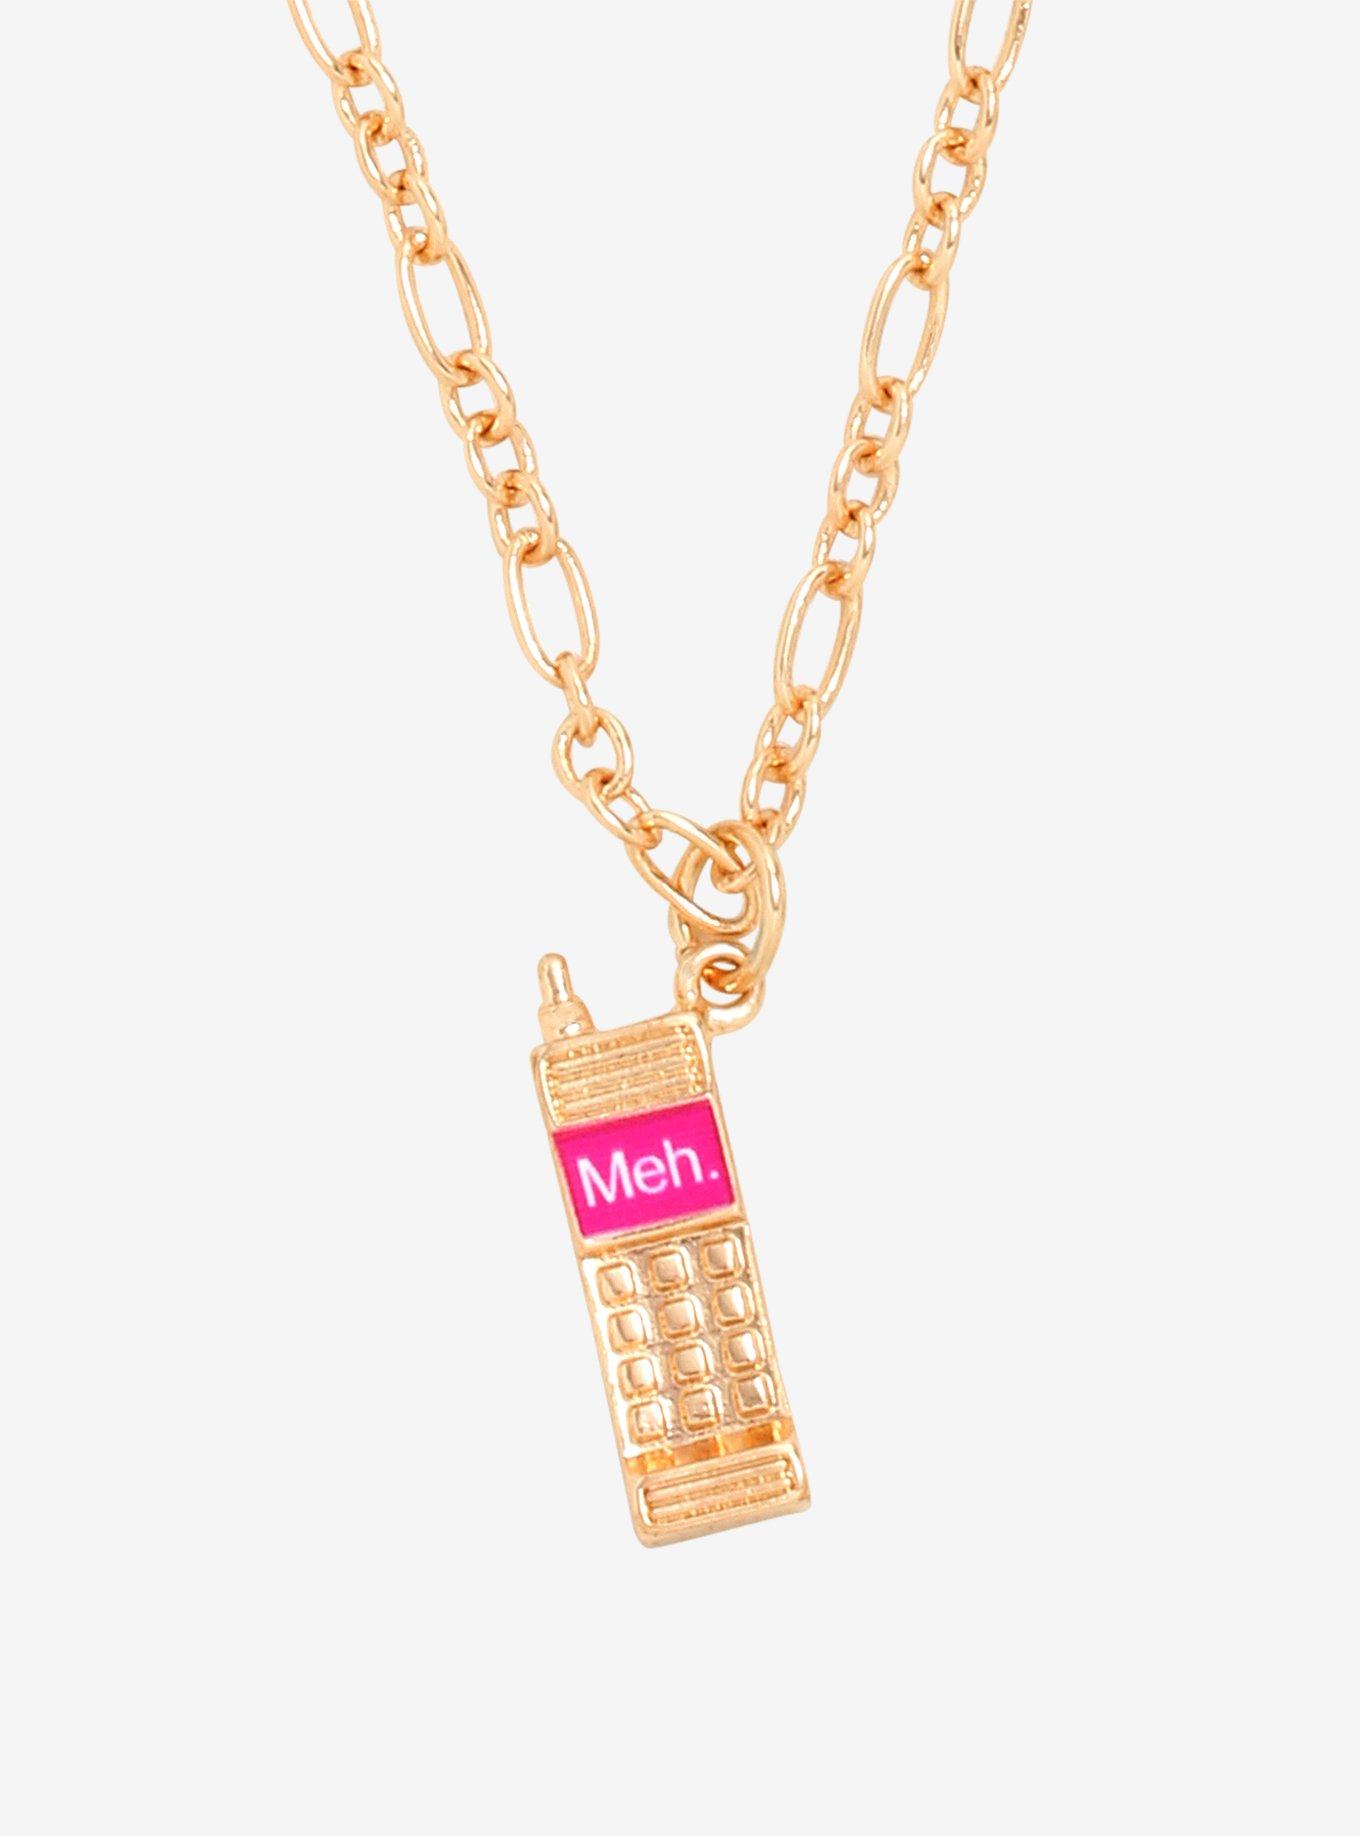 Cell Phone Meh Necklace, , hi-res